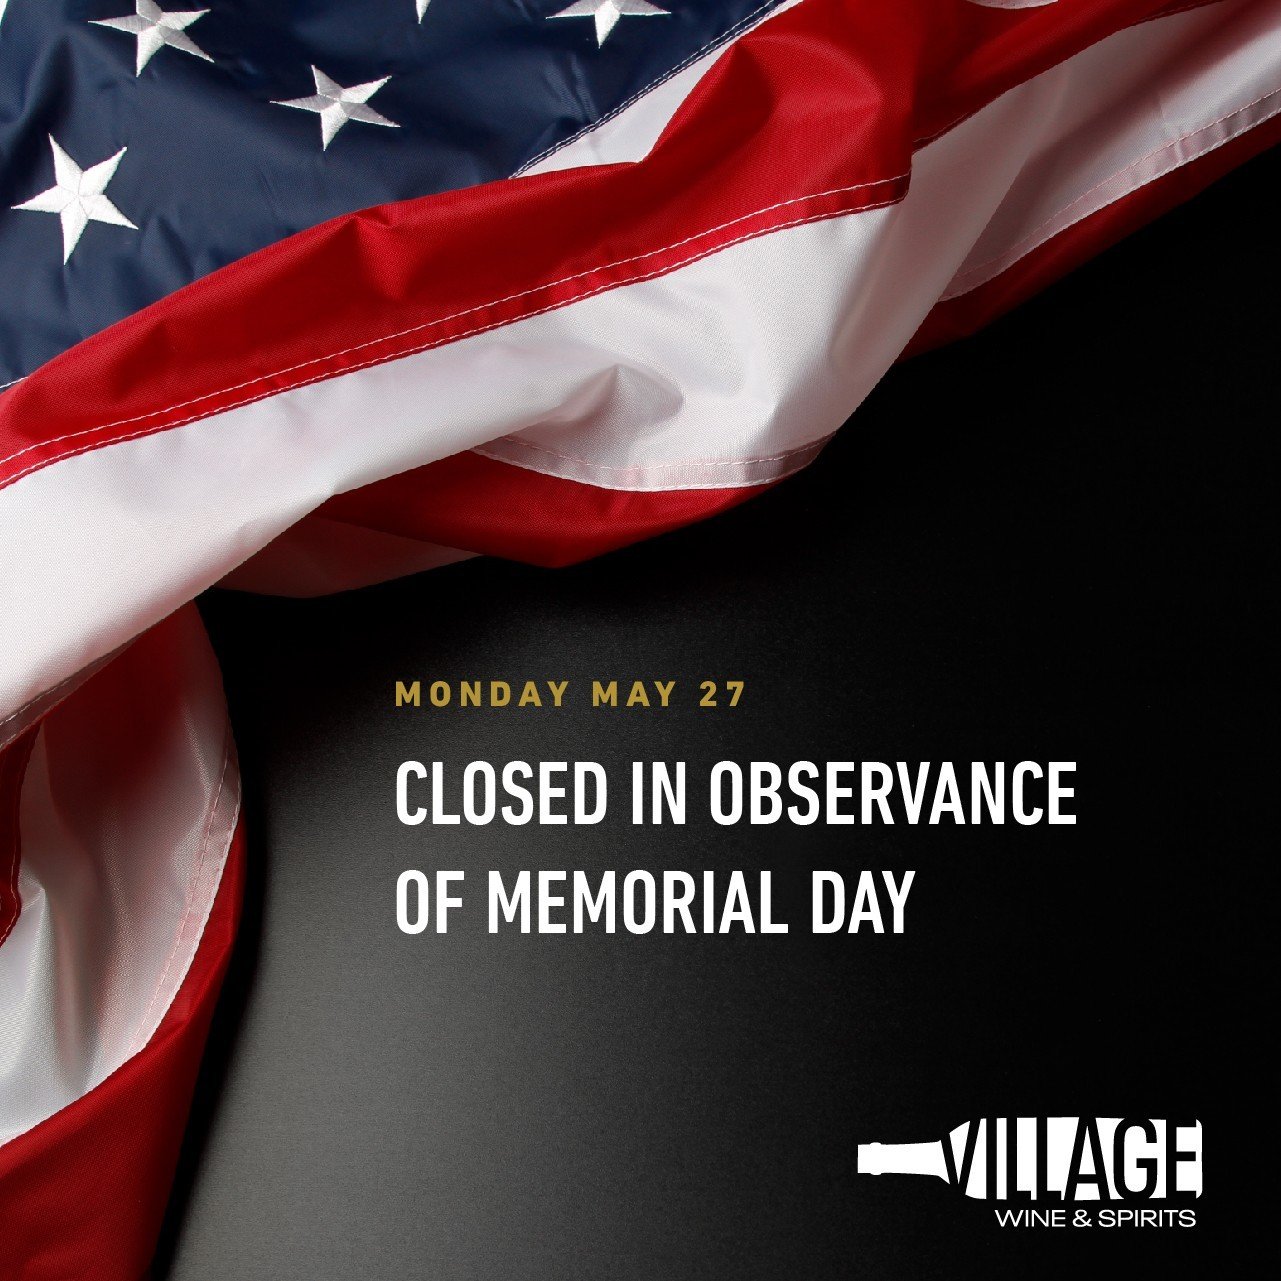 To honor all those who made the ultimate sacrifice, Village Wine will be closed in observance of Memorial Day.